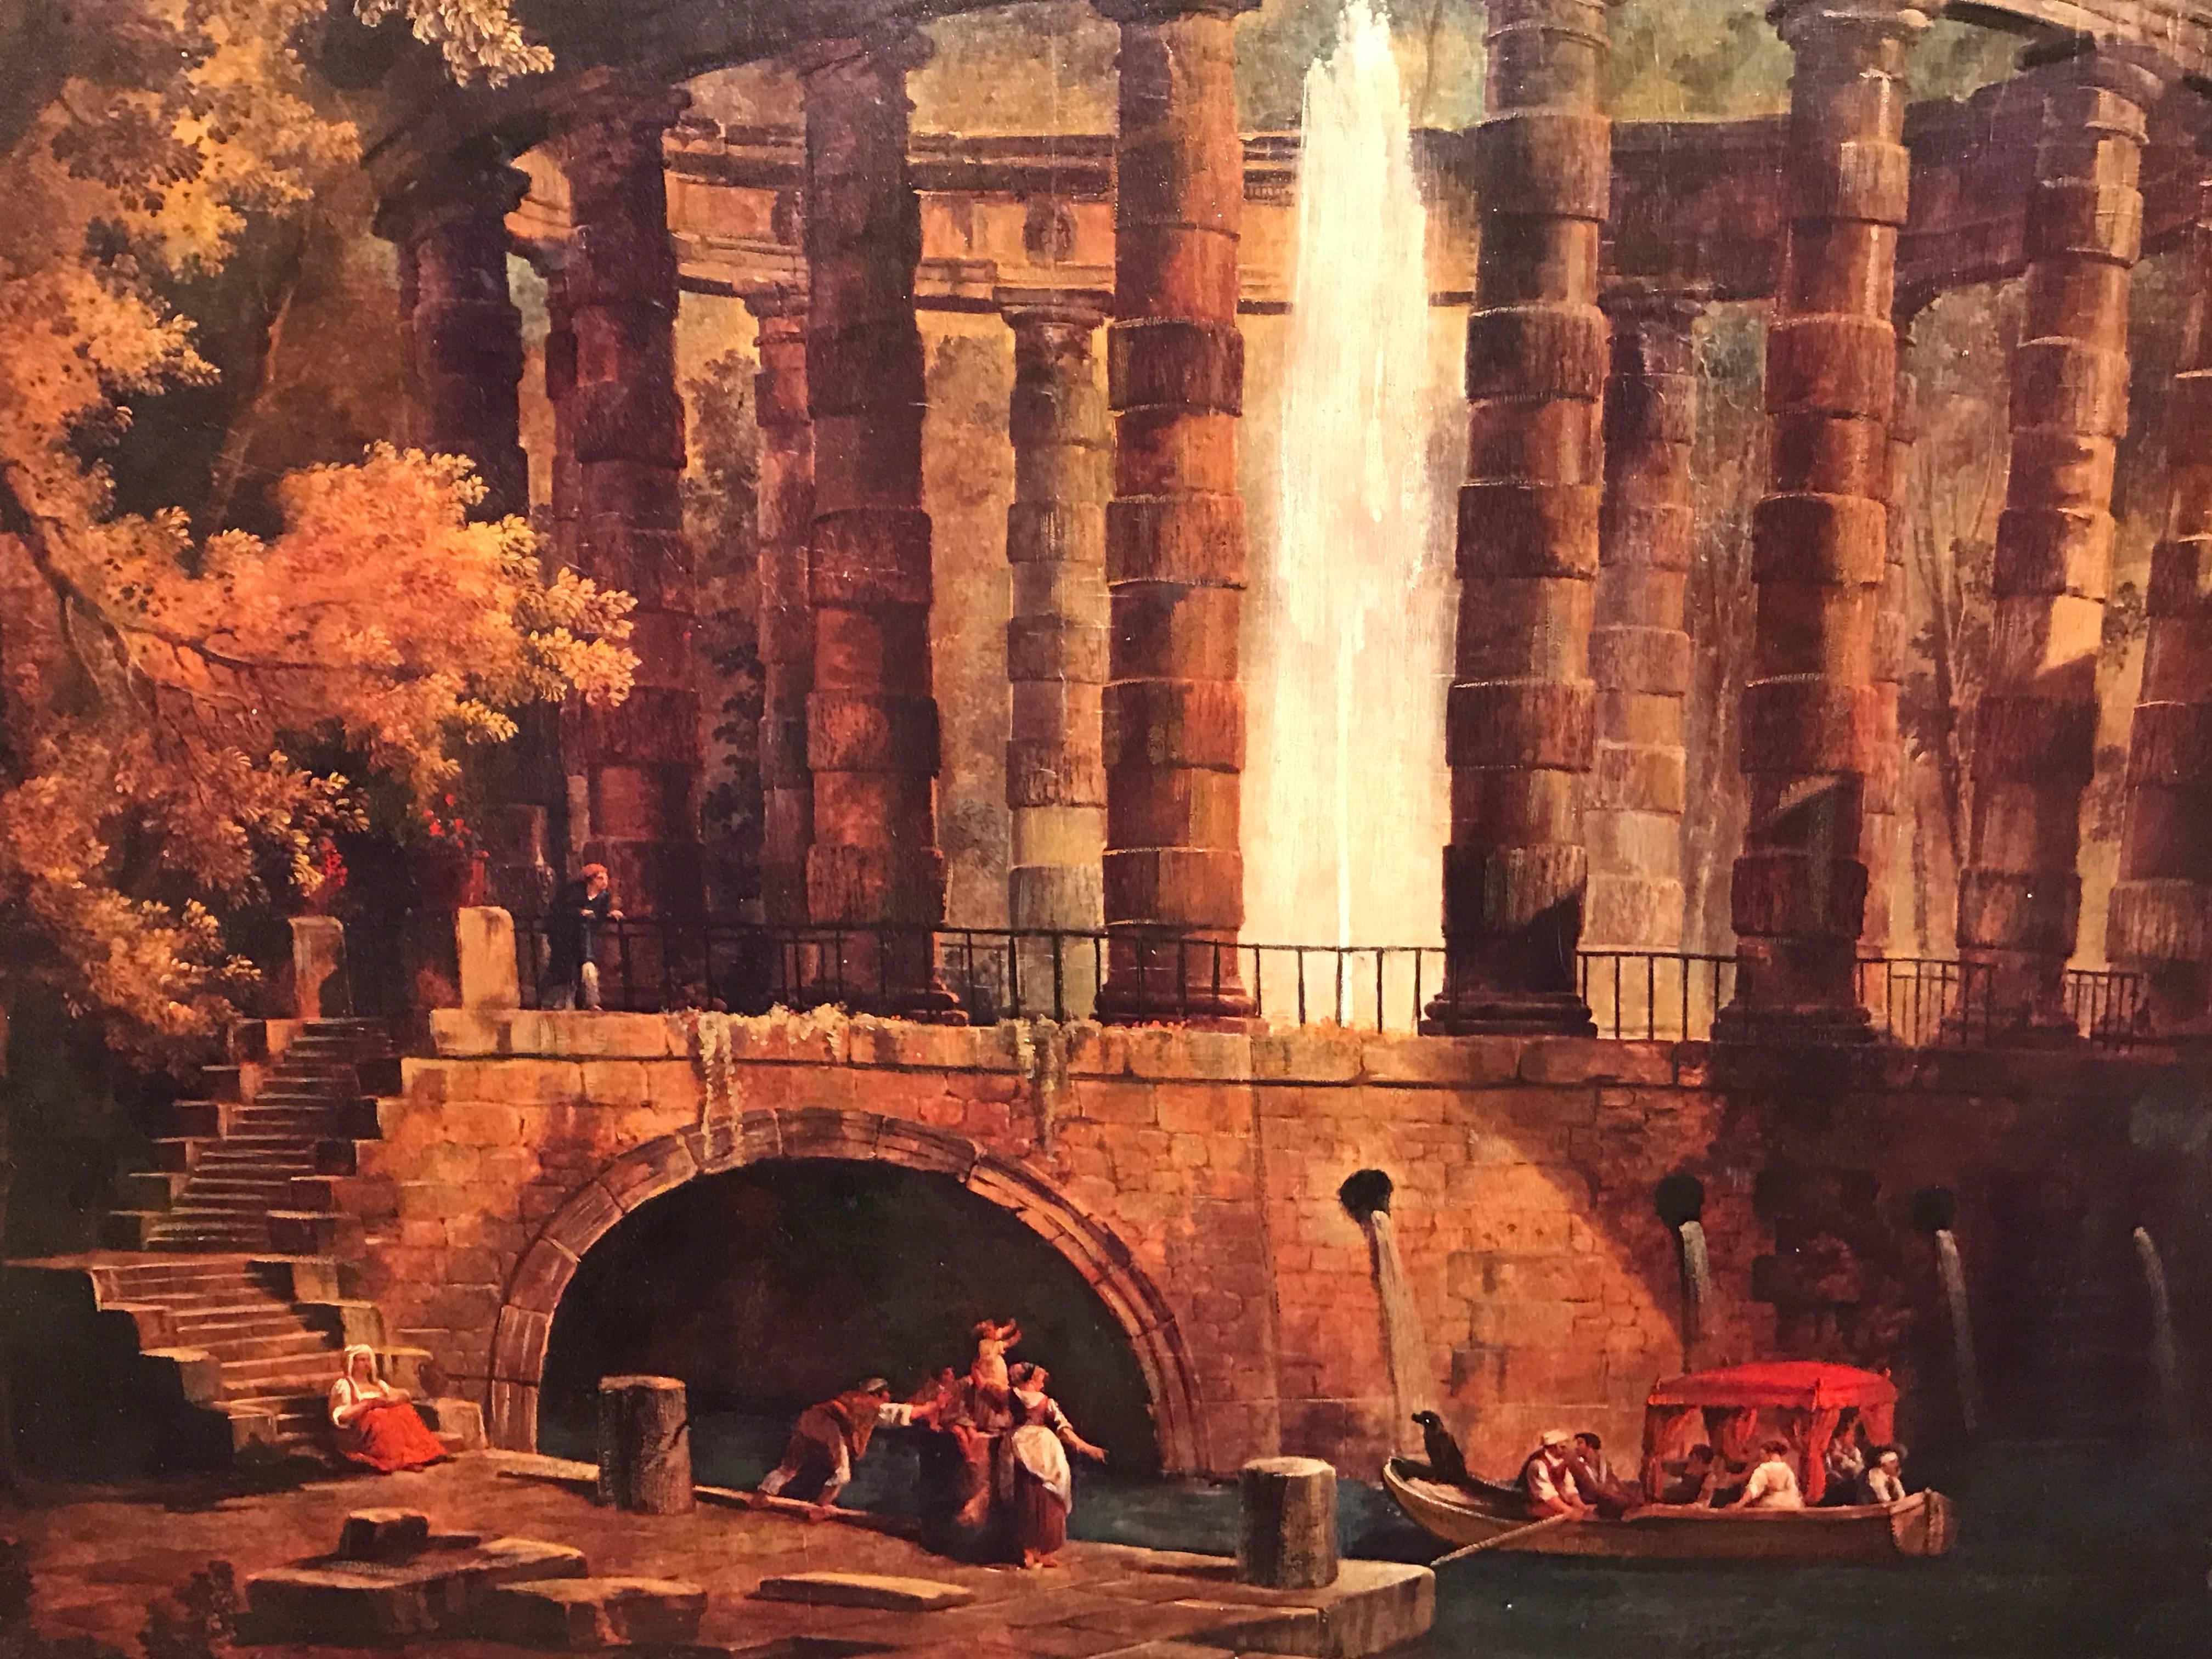 Exceptionally fine quality oil painting on canvas, depicting these travellers before ancient Roman architecture. The subject is likely taken from a Grand Tour expedition of European aristocracy during the 18th century. 

The painting is a 20th